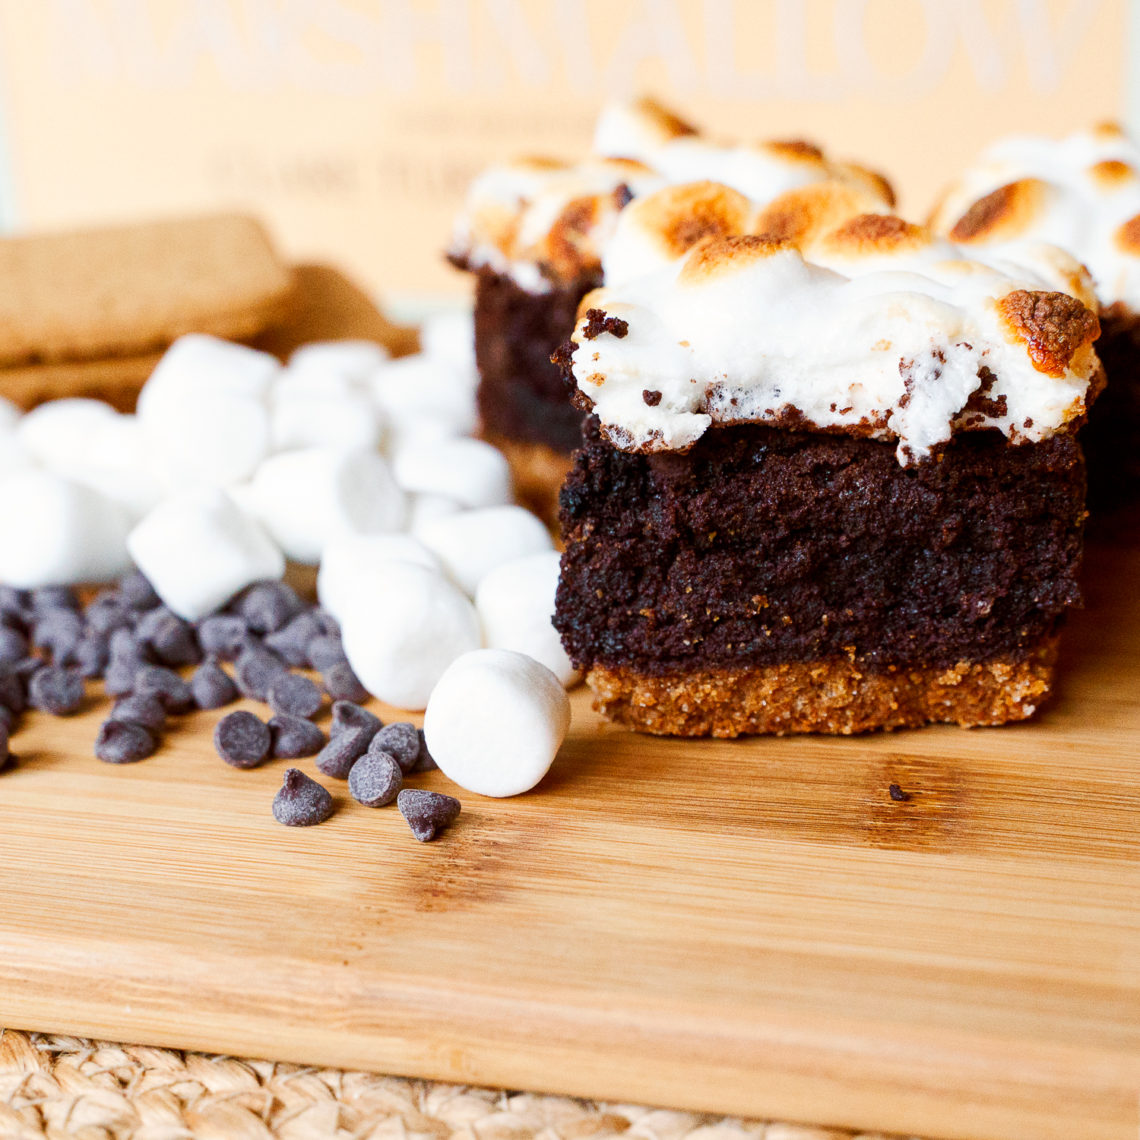 Gluten and Dairy Free S'mores Brownies